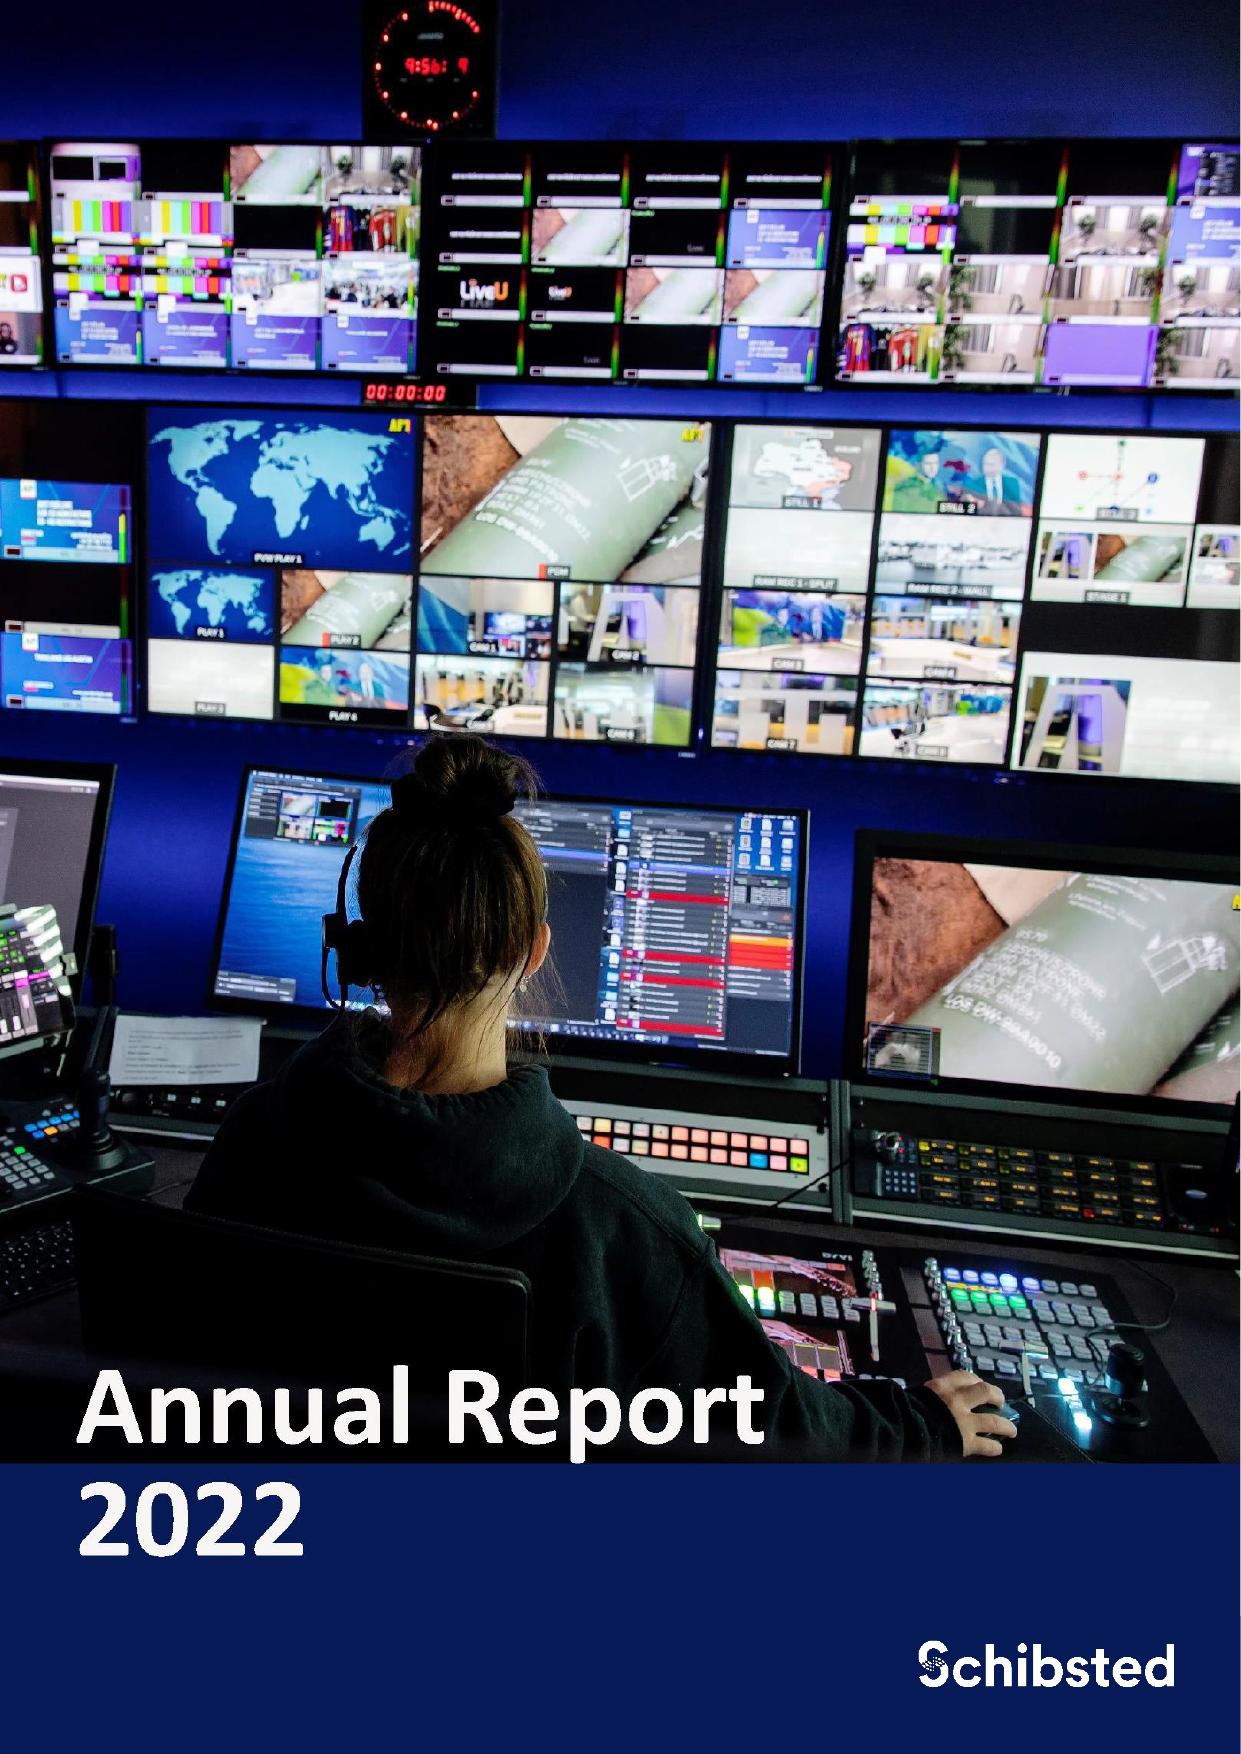 SCHIBSTED 2022 Annual Report